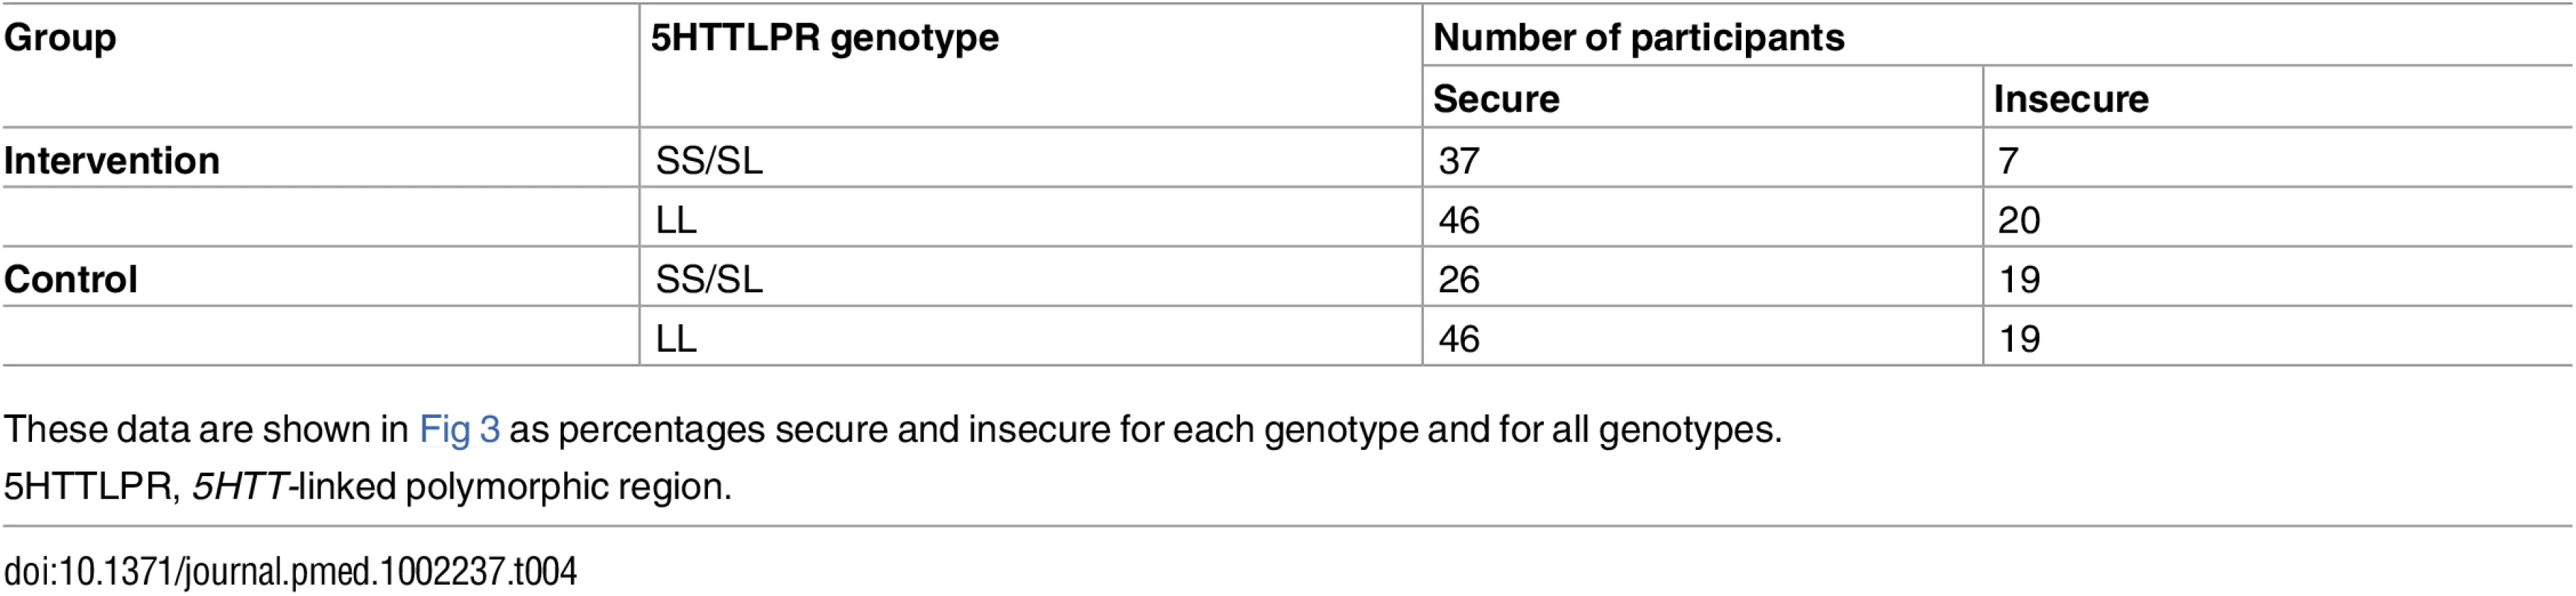 Attachment outcomes for each genotype in the intervention and control groups.